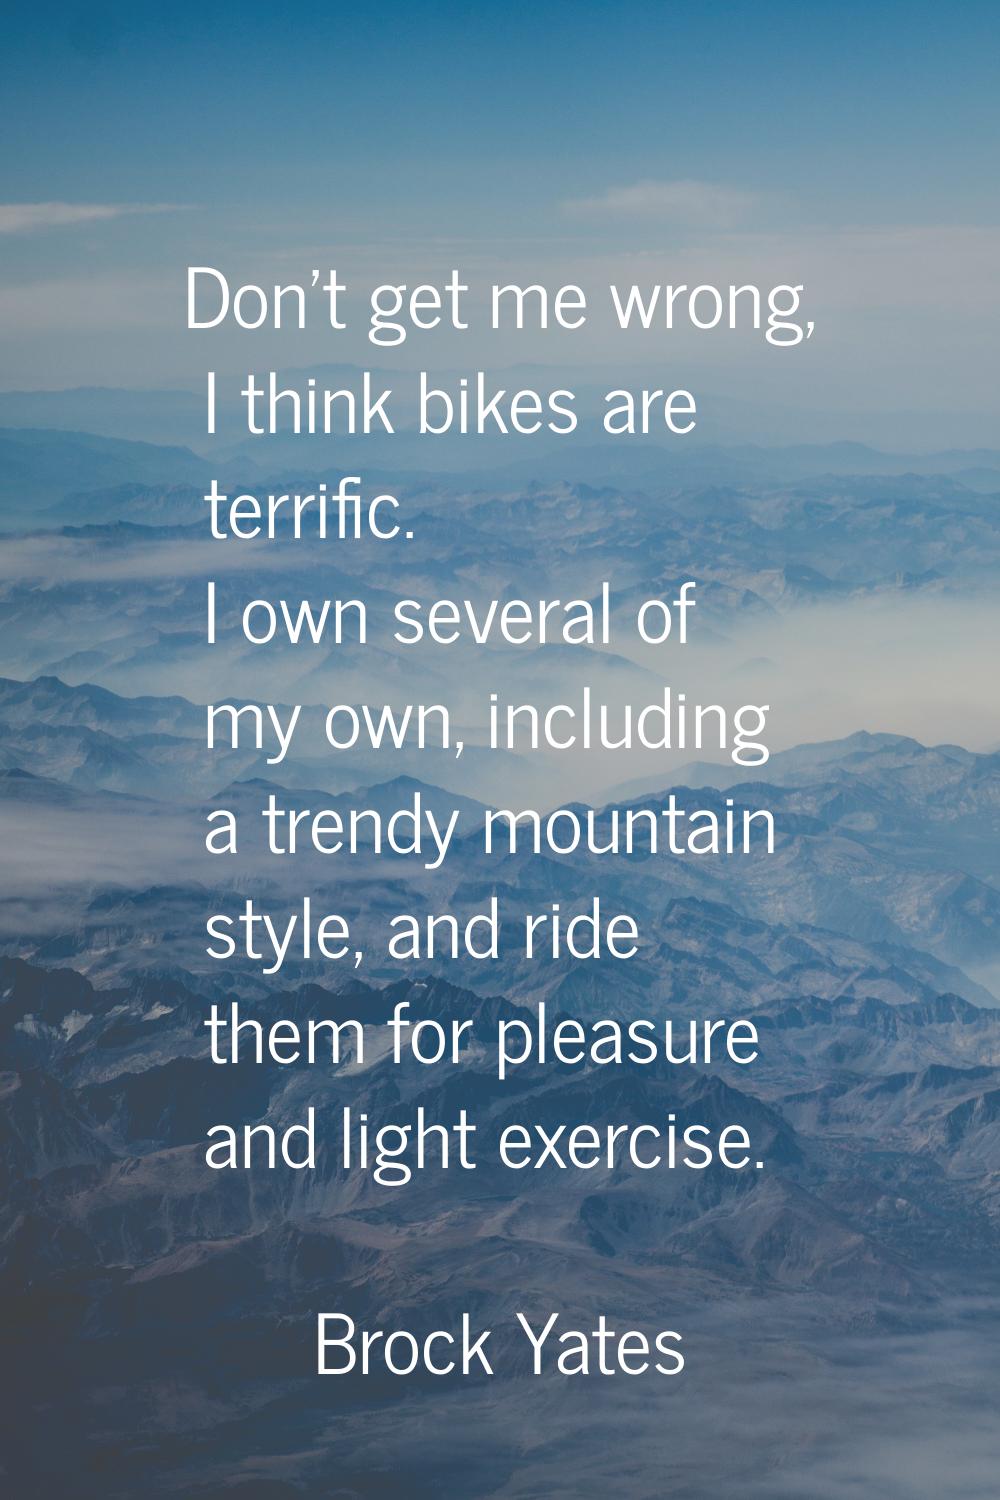 Don't get me wrong, I think bikes are terrific. I own several of my own, including a trendy mountai